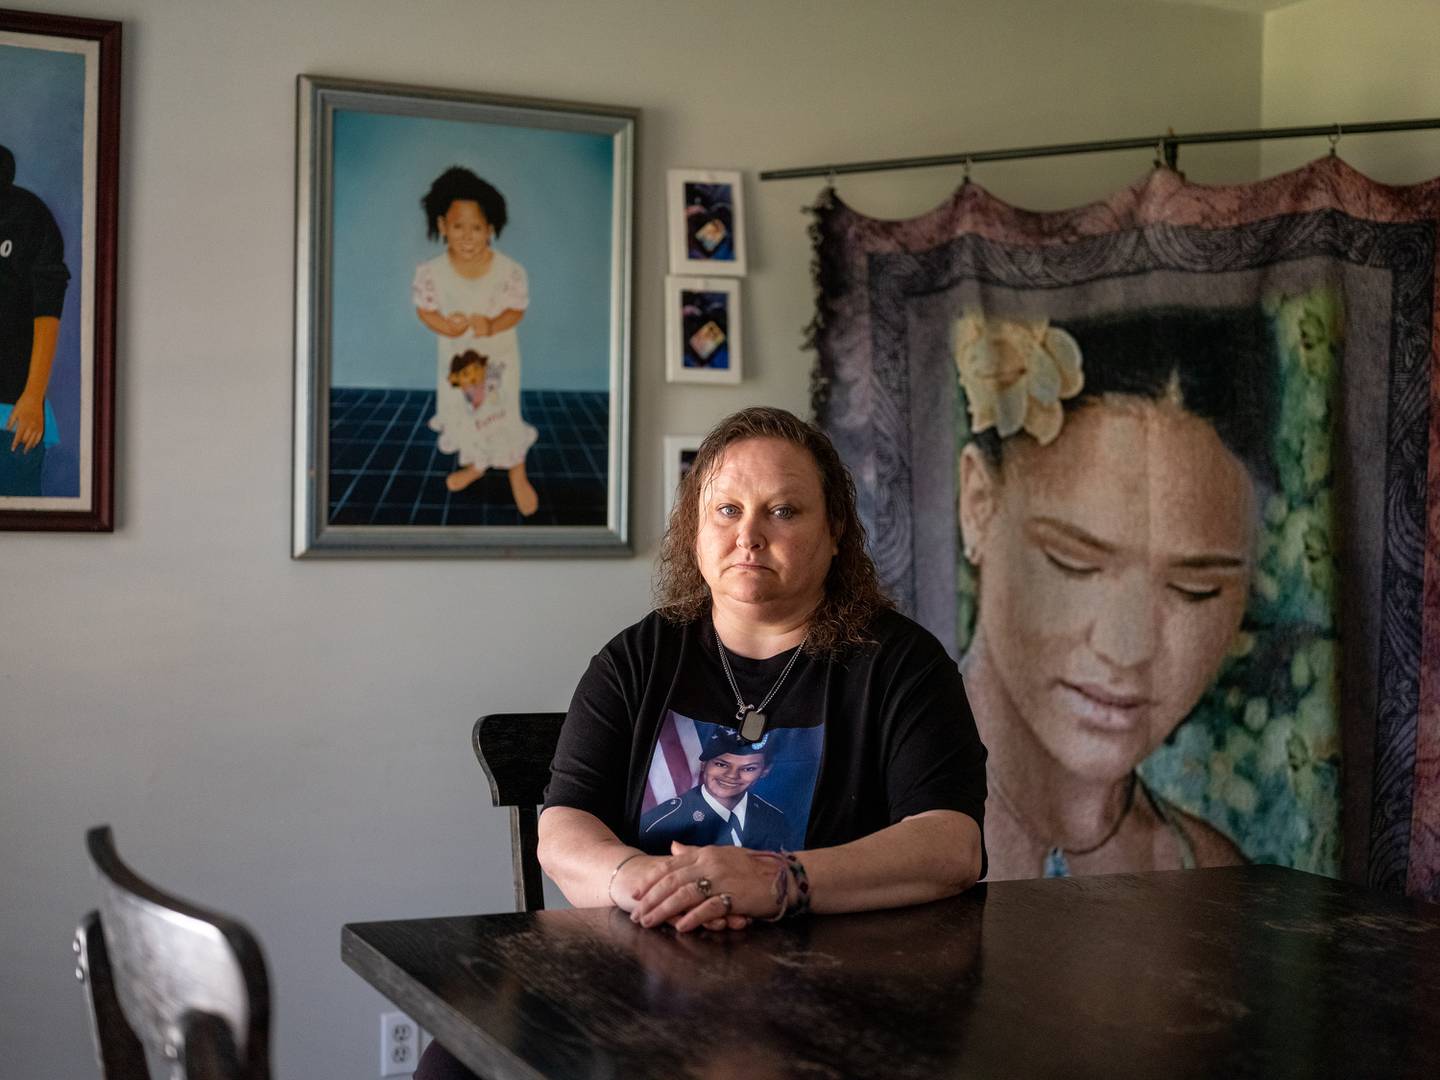 Nicole Graham poses for a portrait in her home, where she has several shrines dedicated to her daughter Asia, who died almost exactly one year to the day after Alvarado assauted her.